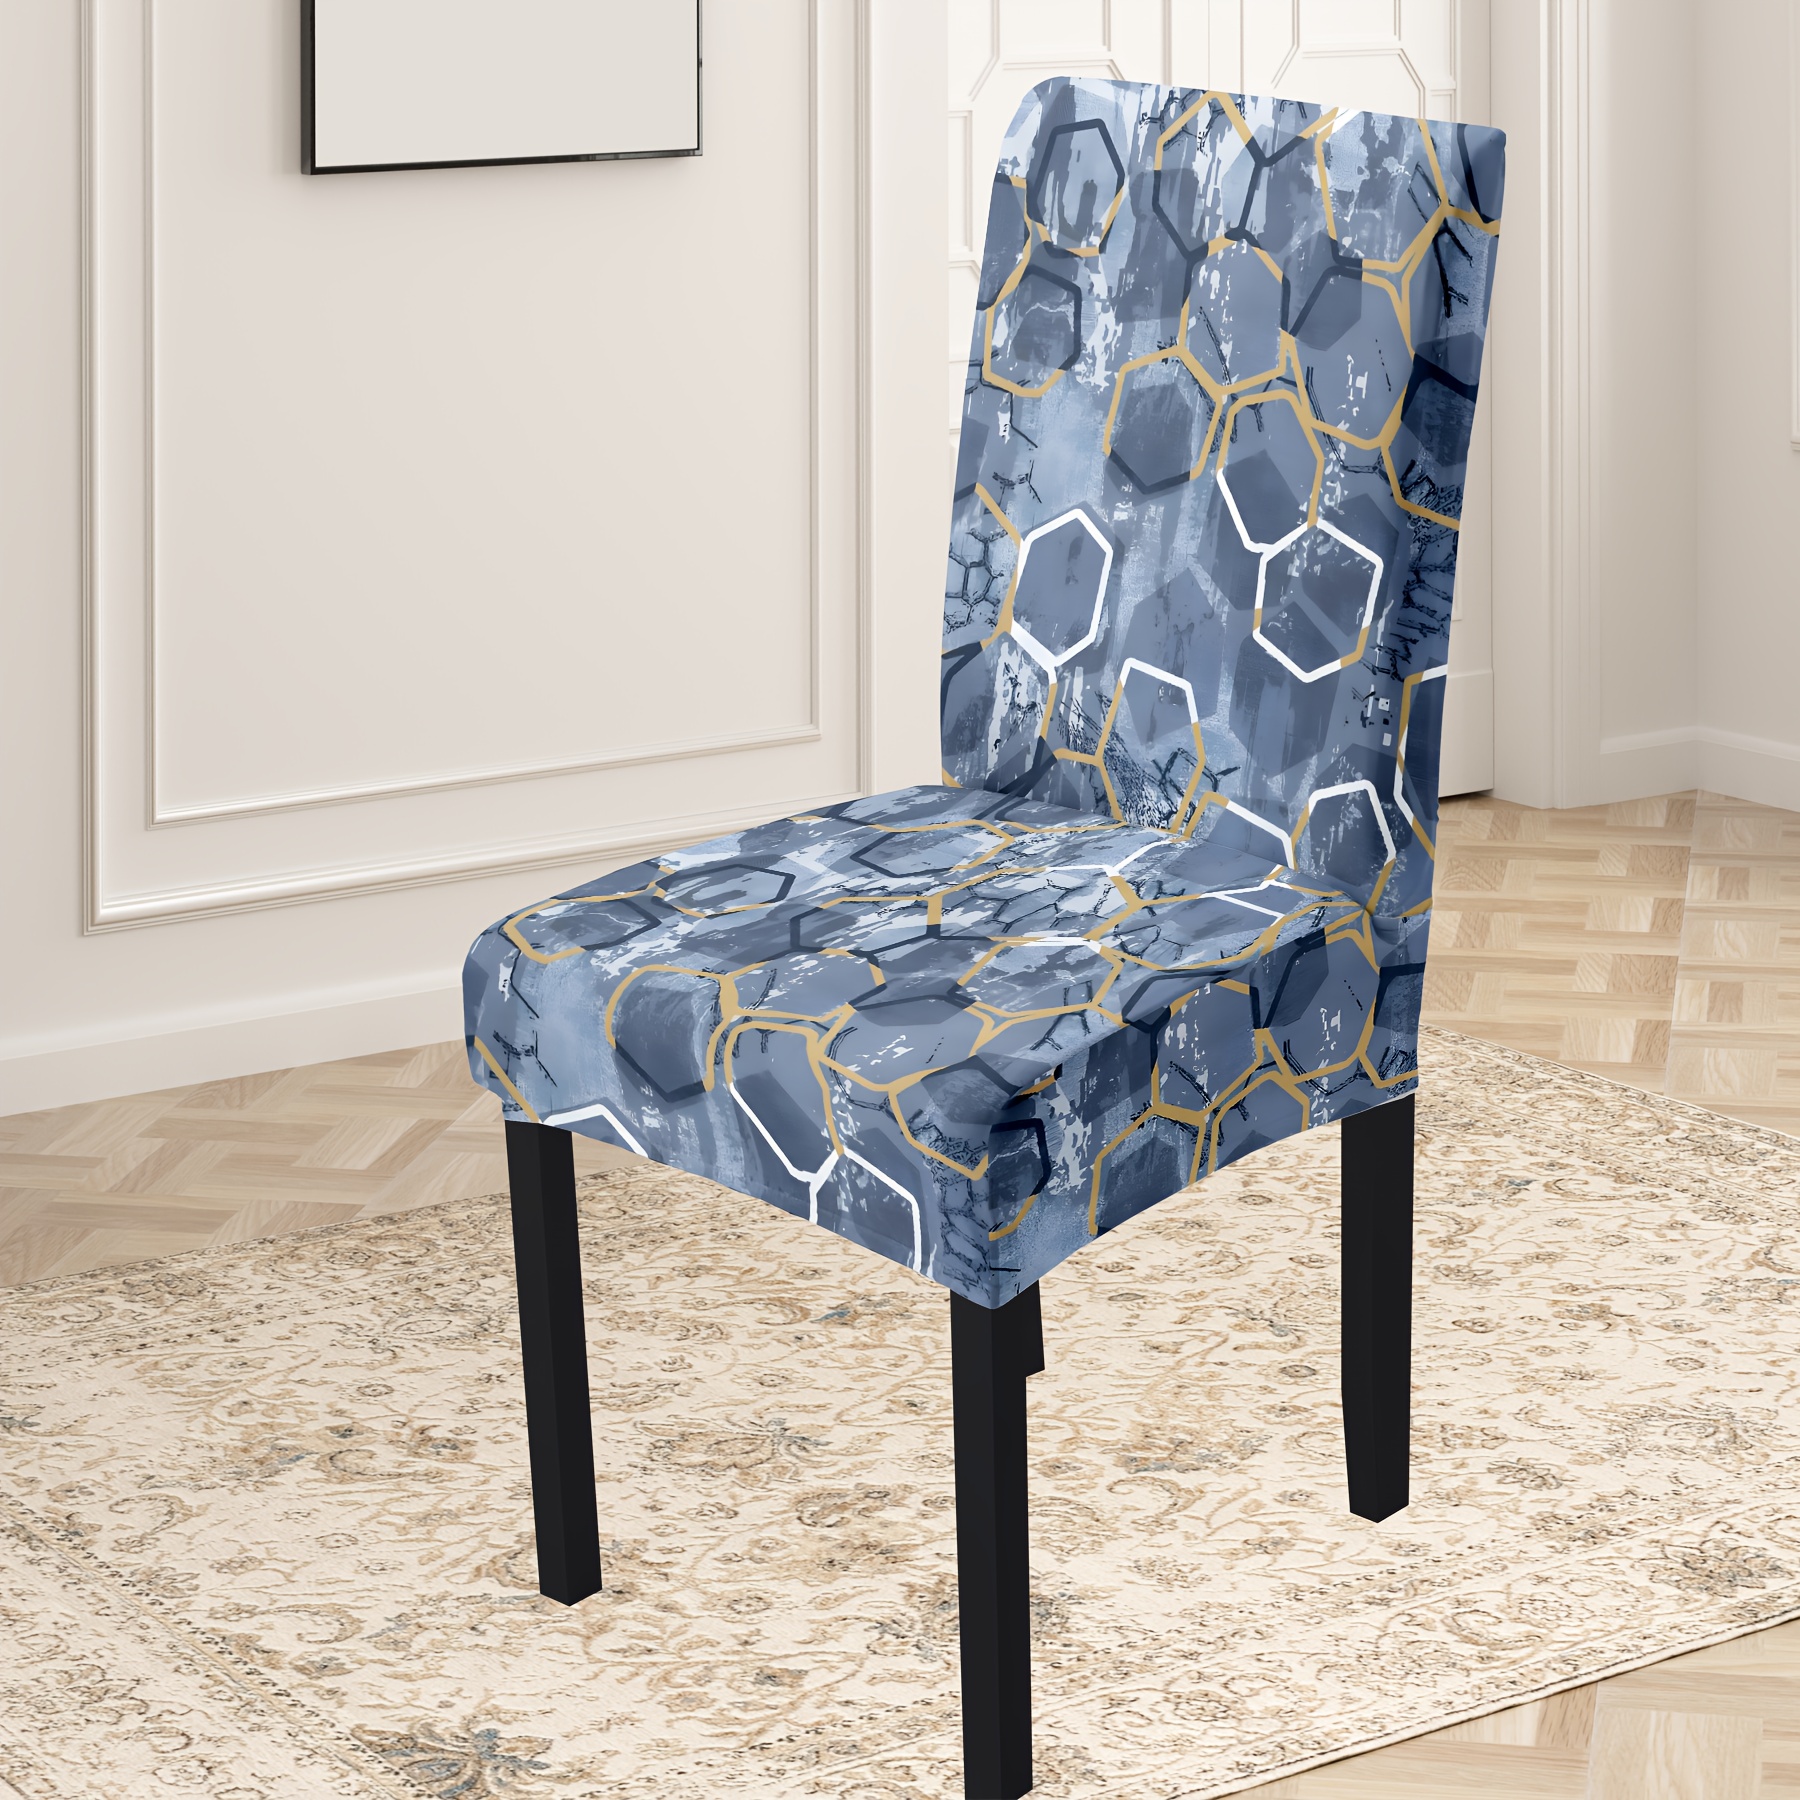 

4/6pcs Classic Geometric Polygon Print Chair Covers, Stretchable Milk Silk Fabric, Dust-proof & Dirt-resistant, Machine Washable, For Home Dining Chairs, Hotels, Gardens - Blue &